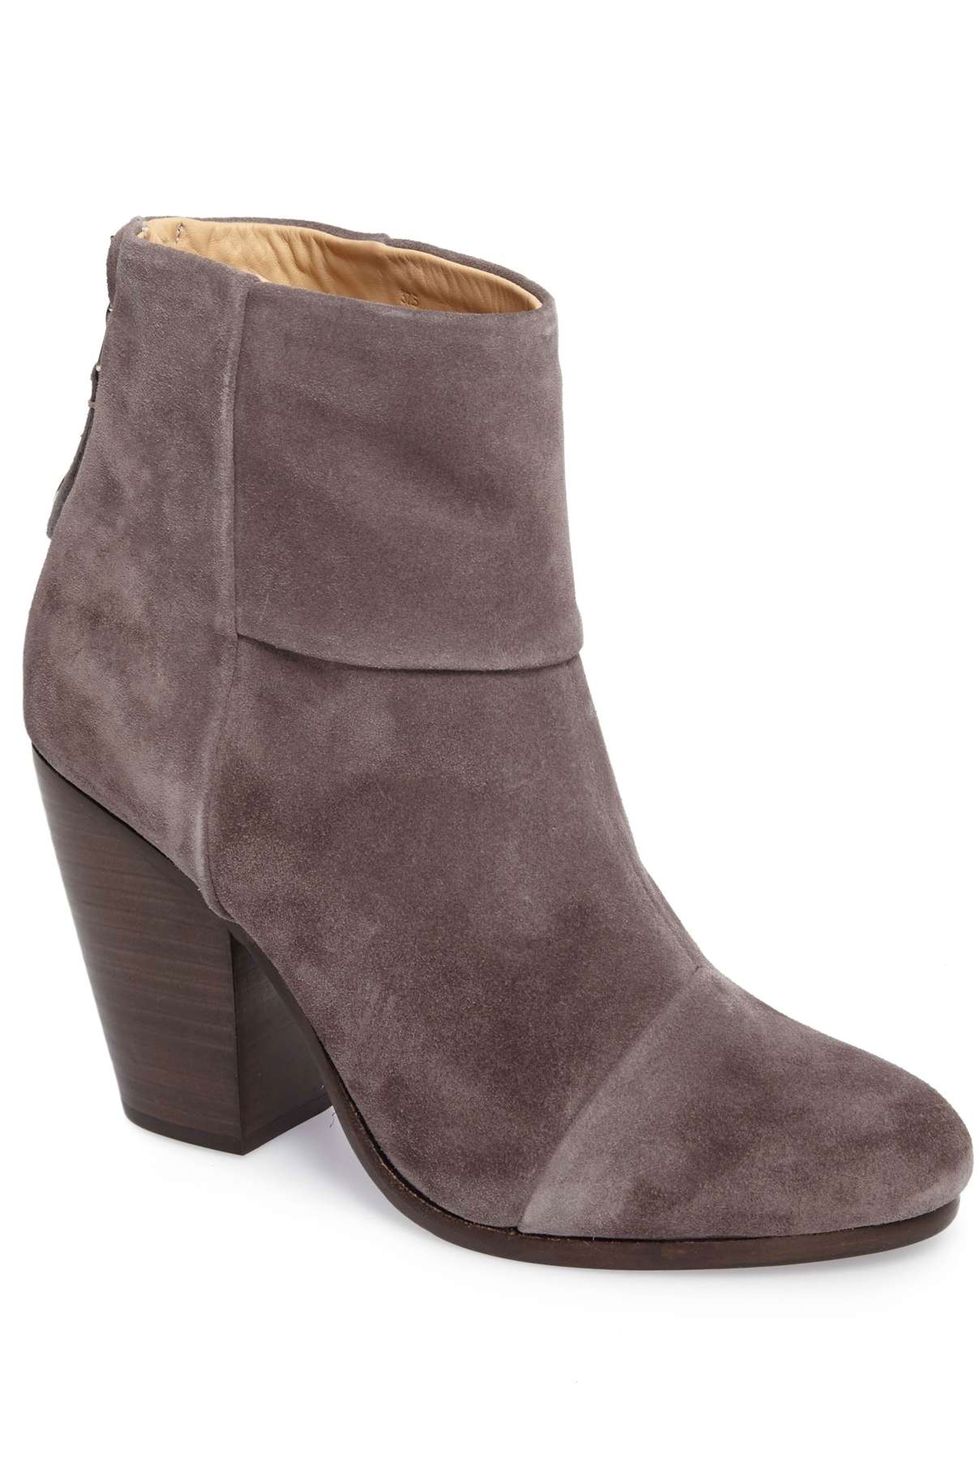 The Weekly Covet: Fall Footwear Edition